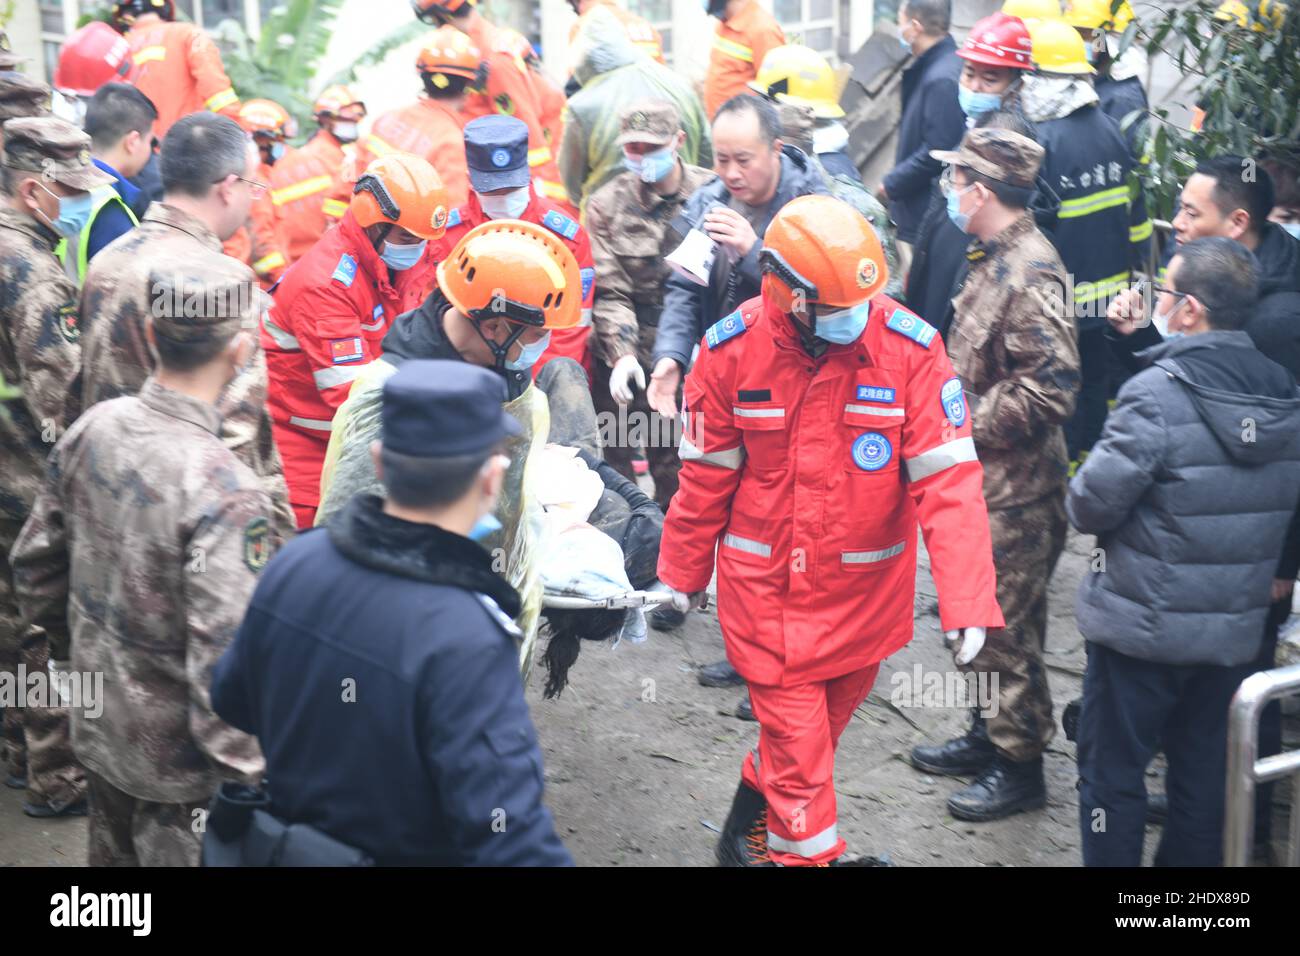 (220107) -- CHONGQING, Jan. 7, 2022 (Xinhua) -- Rescuers transport a trapped person at the site of a blast in Wulong District, southwest China's Chongqing, Jan. 7, 2022. More than 20 people were believed to have been trapped after a blast rocked a canteen of a subdistrict office in Wulong District, southwest China's Chongqing Municipality, on Friday noon. The accident took place at 12:10 p.m. due to suspected gas leakage which triggered the explosion and caused the collapse, said the municipal publicity department. According to witnesses, people were having lunch in the canteen when the b Stock Photo